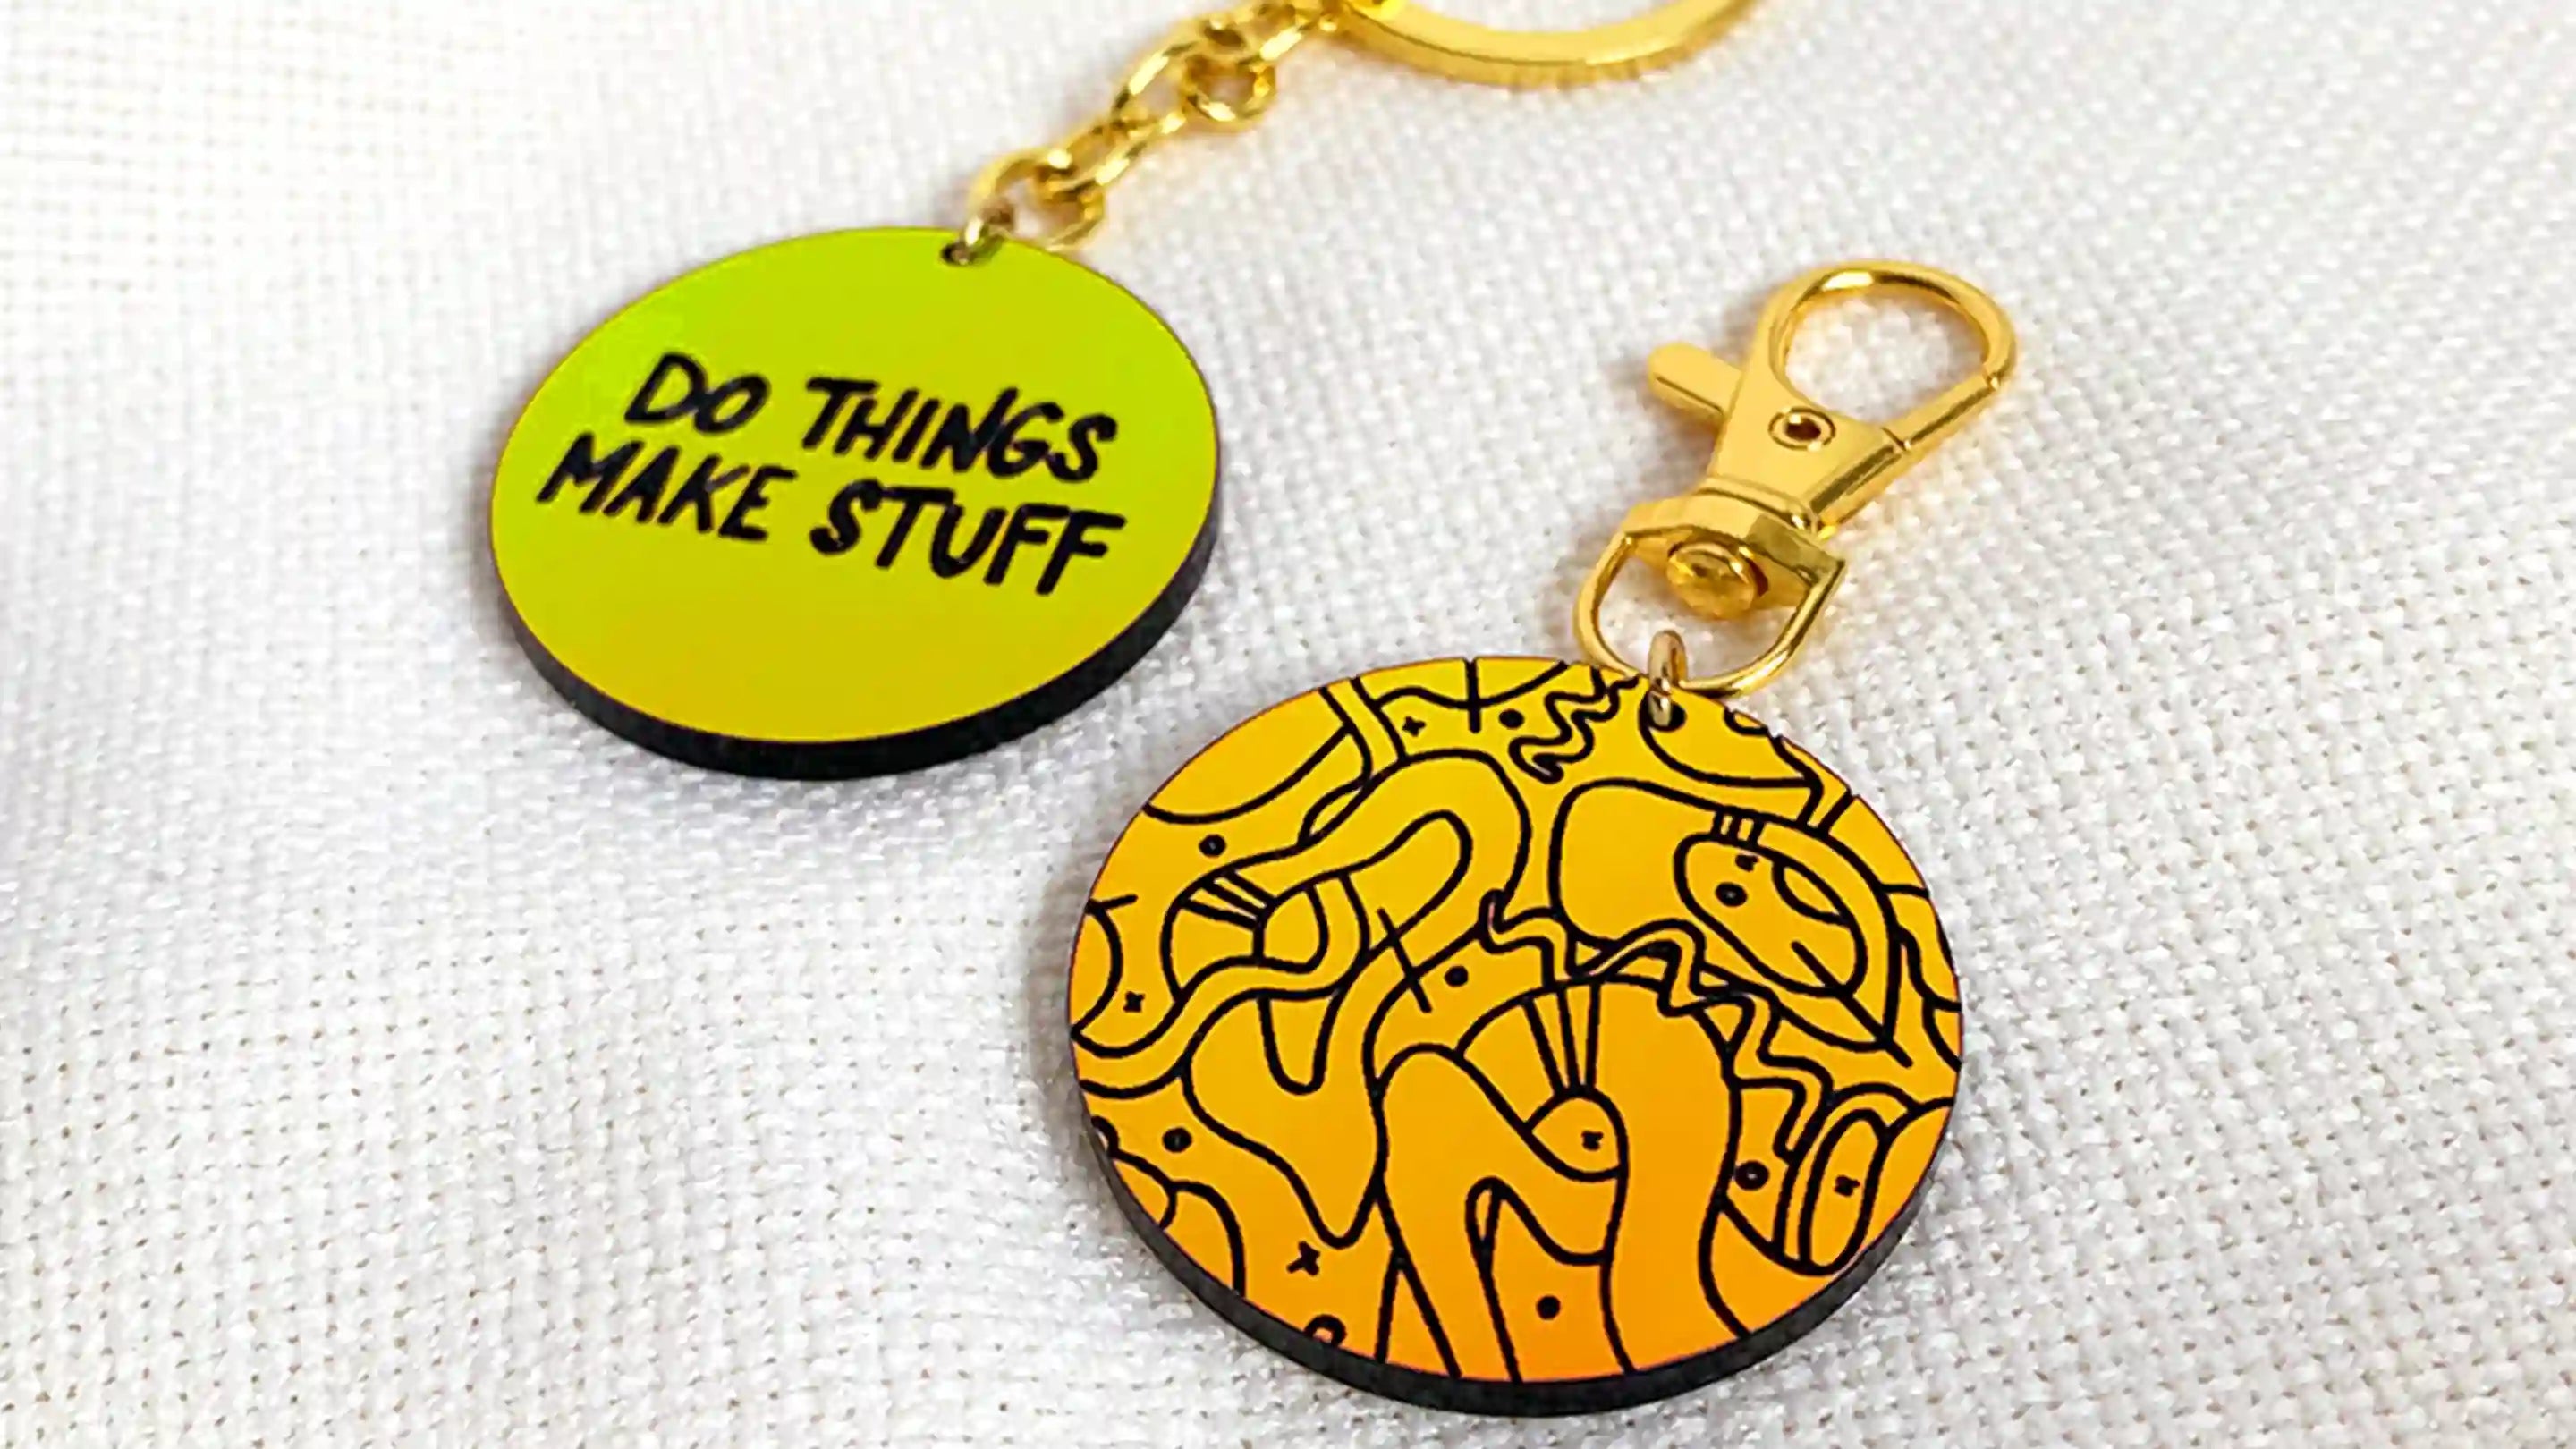 Two keychains placed next to each other on a piece of cloth. One is orange with an abstract design. The other is green and has the words "Do Things Make Stuff" on it.